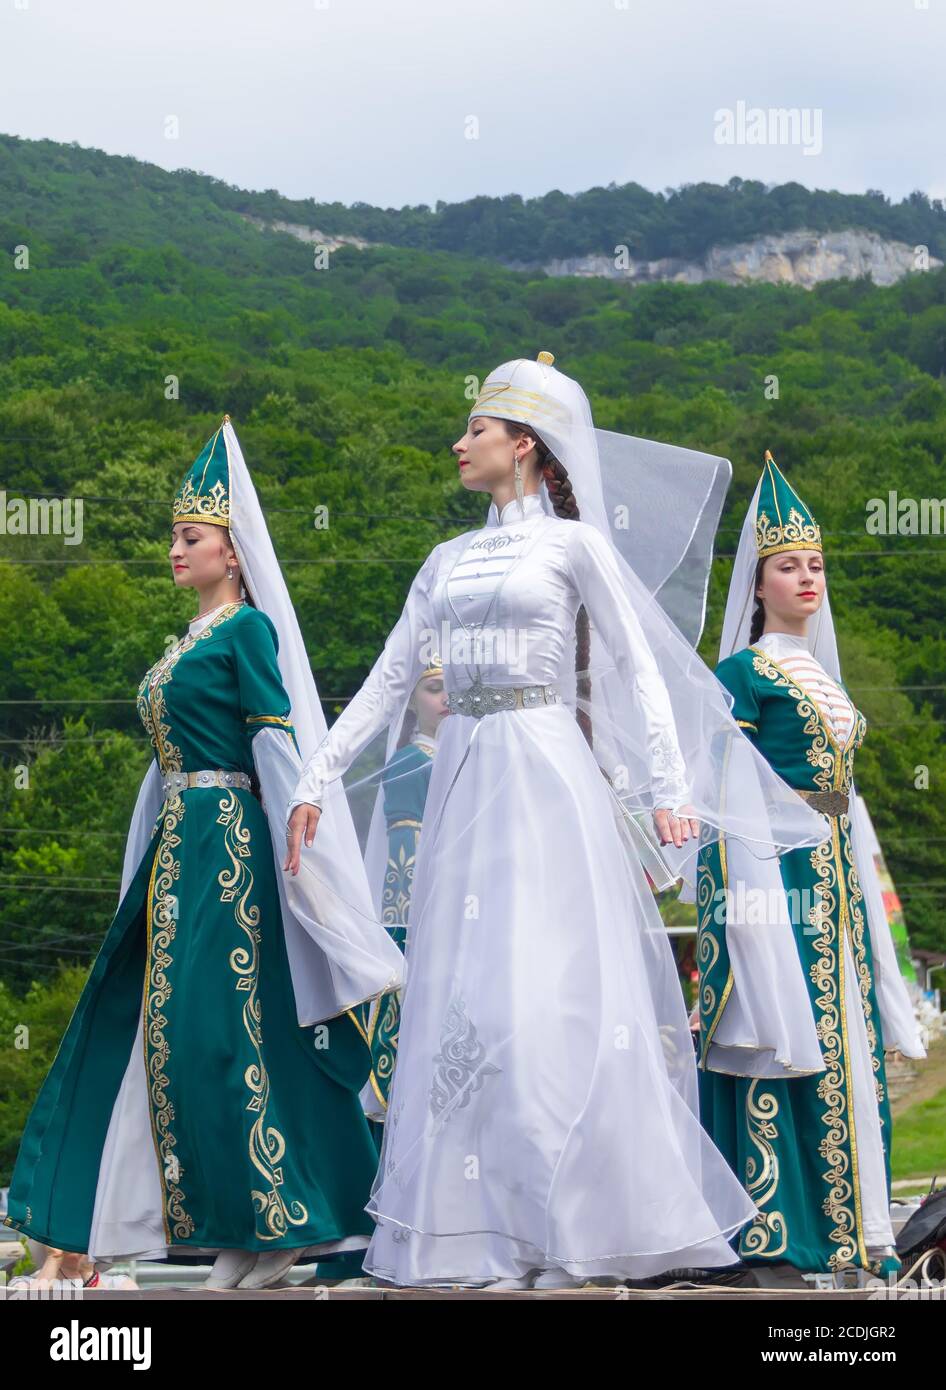 Adygea, RUSSIA - JULY 25 2015: Female dancers in traditional costumes  Circassian green hills in the background. Ethnic festival in the foothills  of th Stock Photo - Alamy